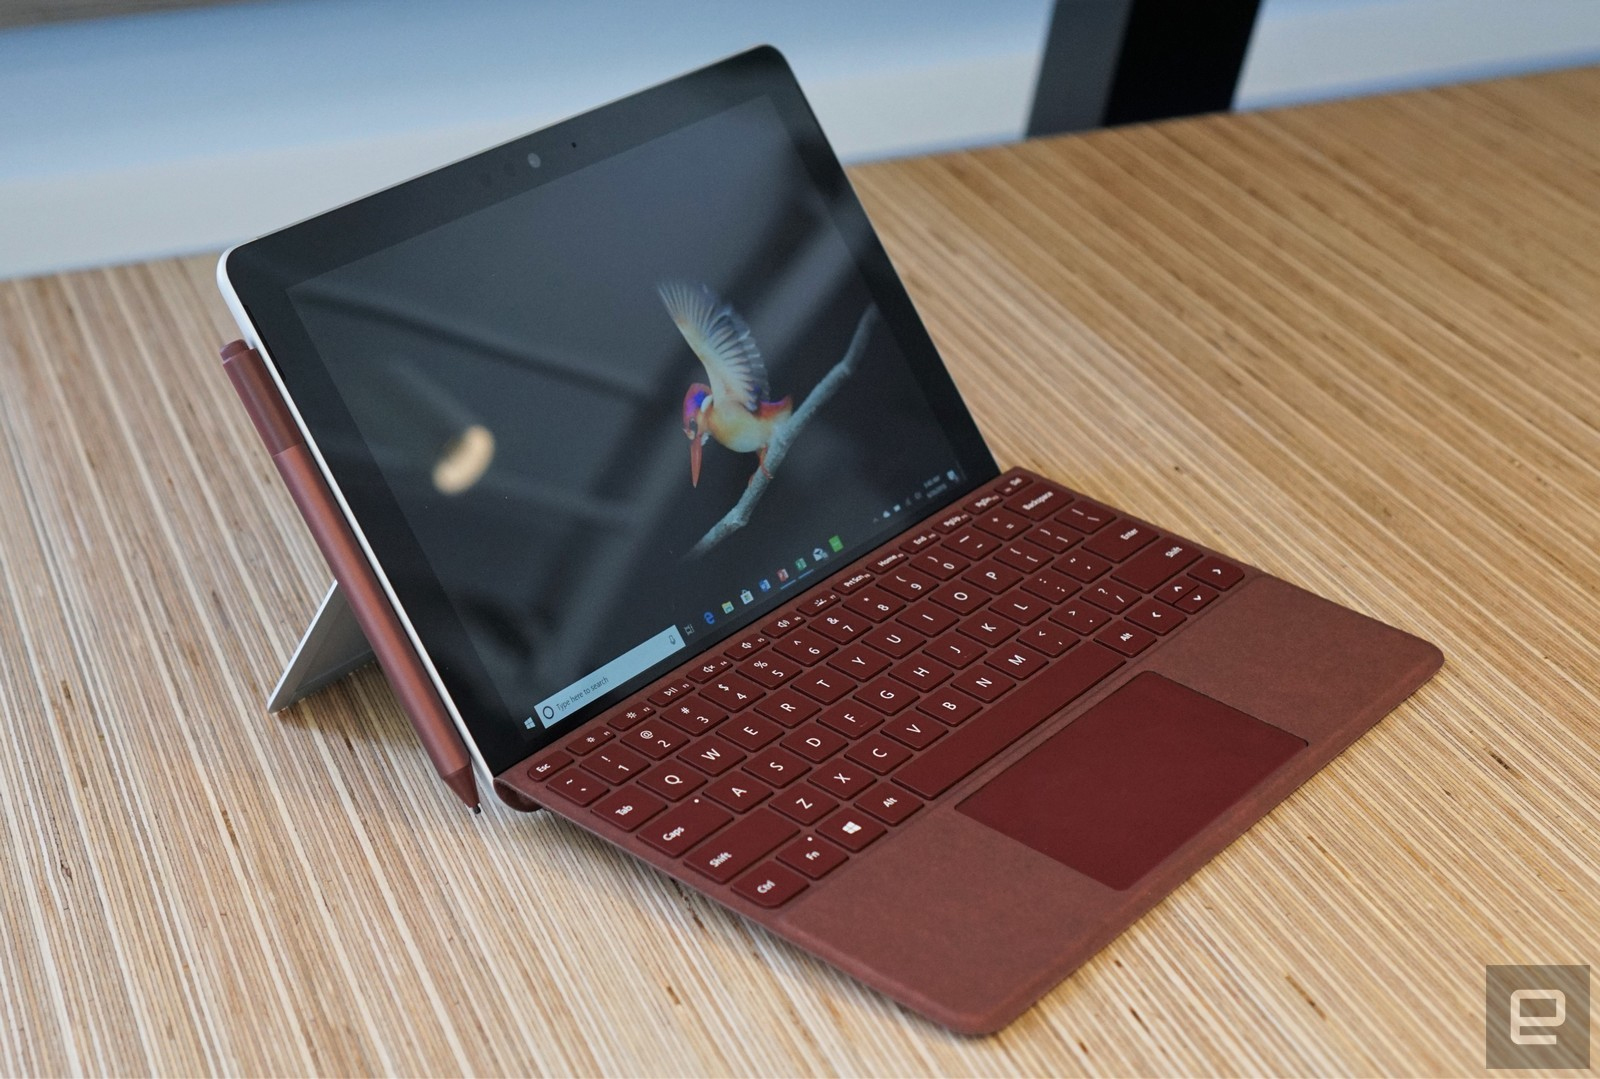 Microsoft's Surface Go is an Affordable 2-in-1 with Pen Support